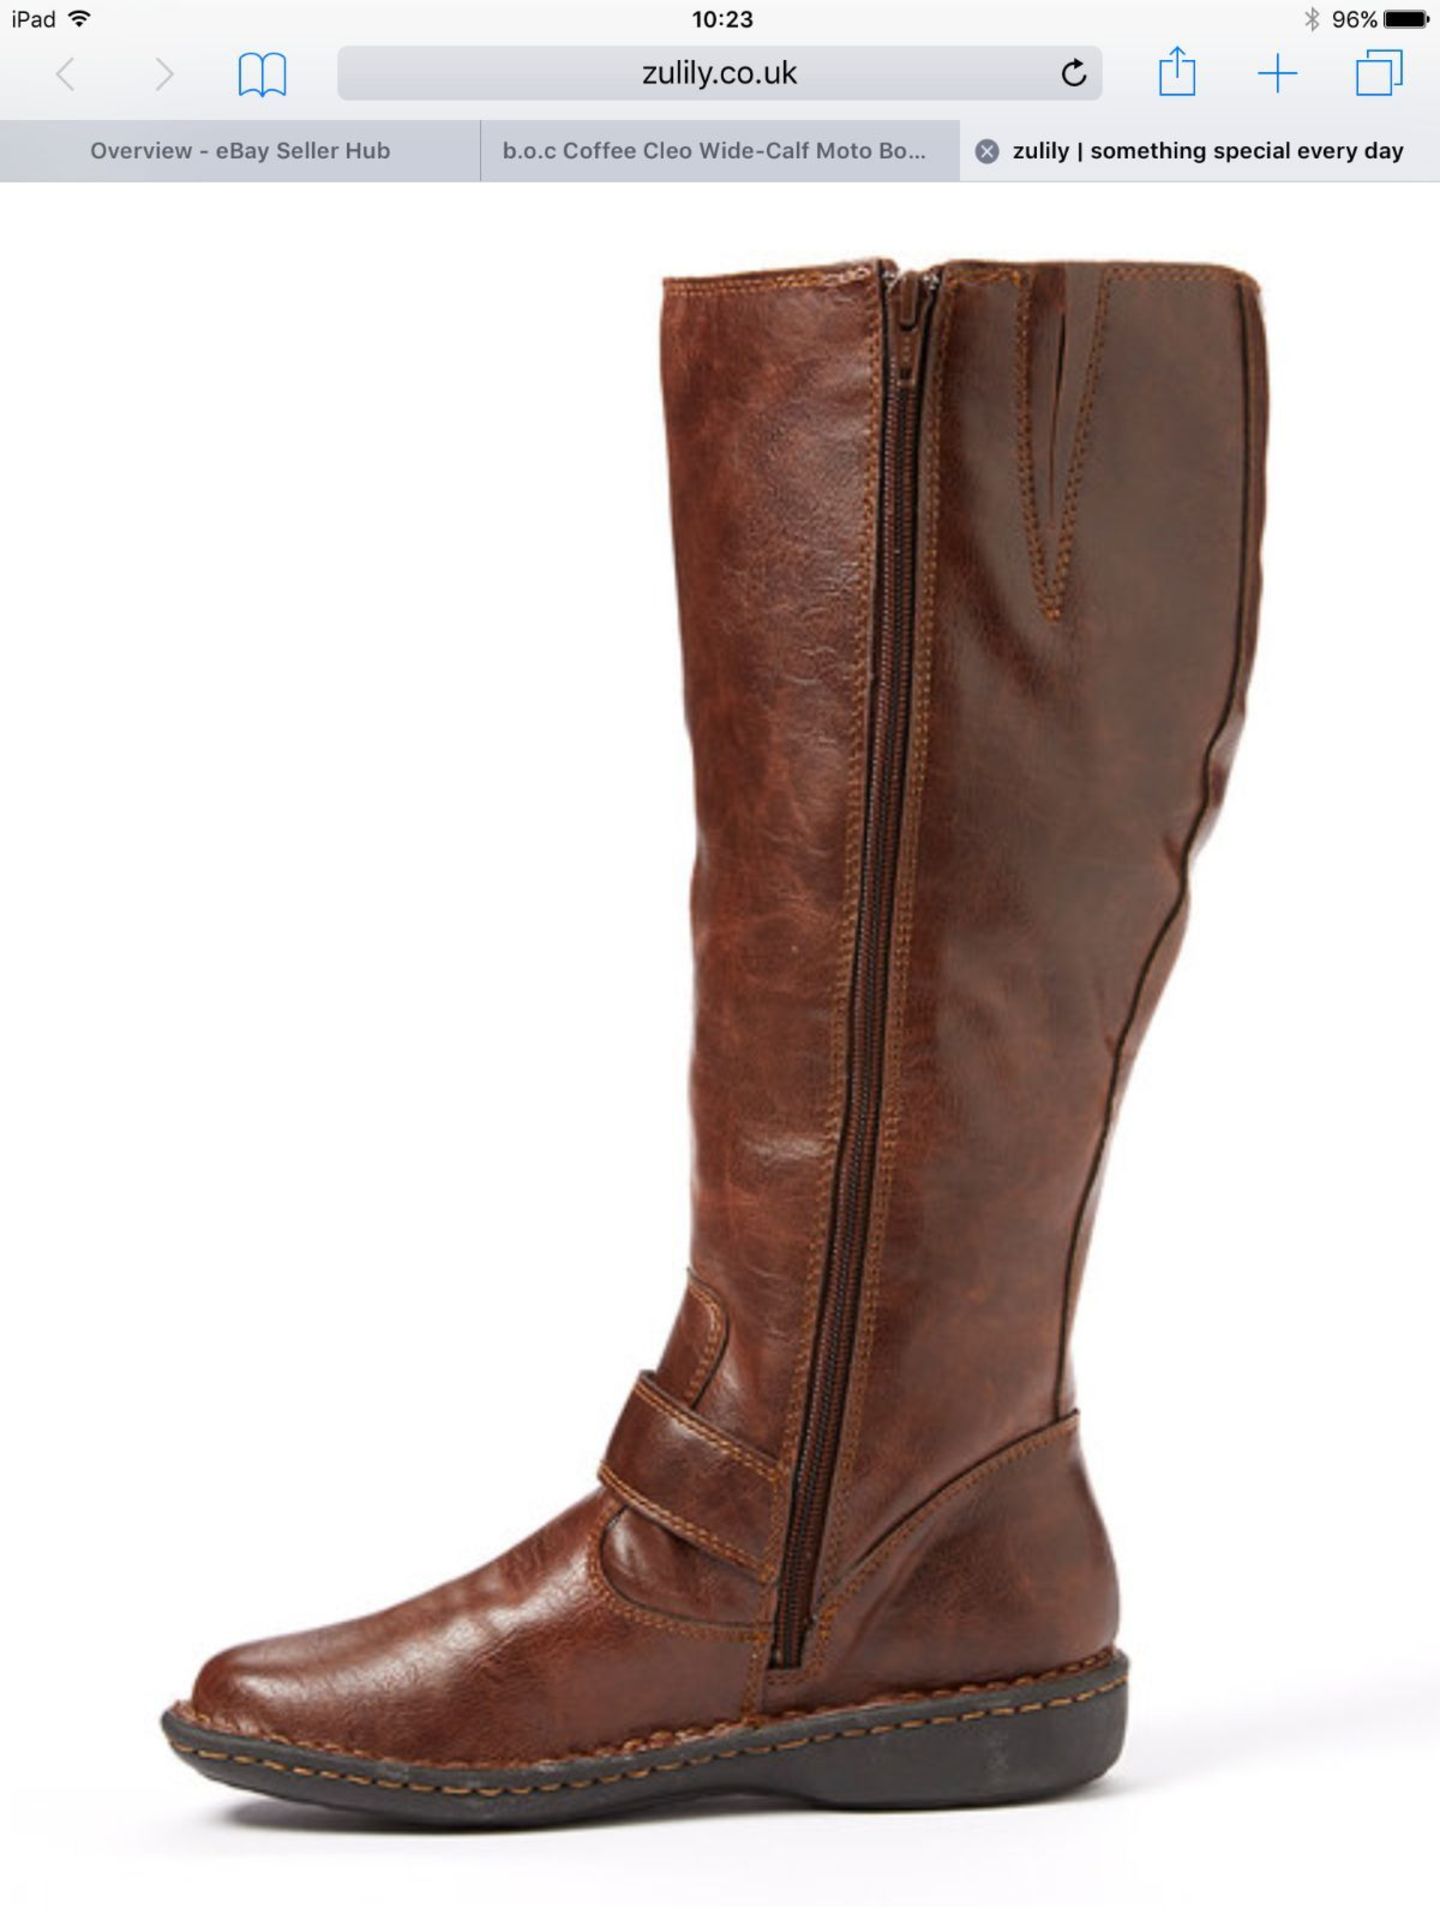 b.o.c. Coffee Cleo Wide-Calf Moto Boot, Size Eur 38, RRP £130.99 - Image 2 of 4